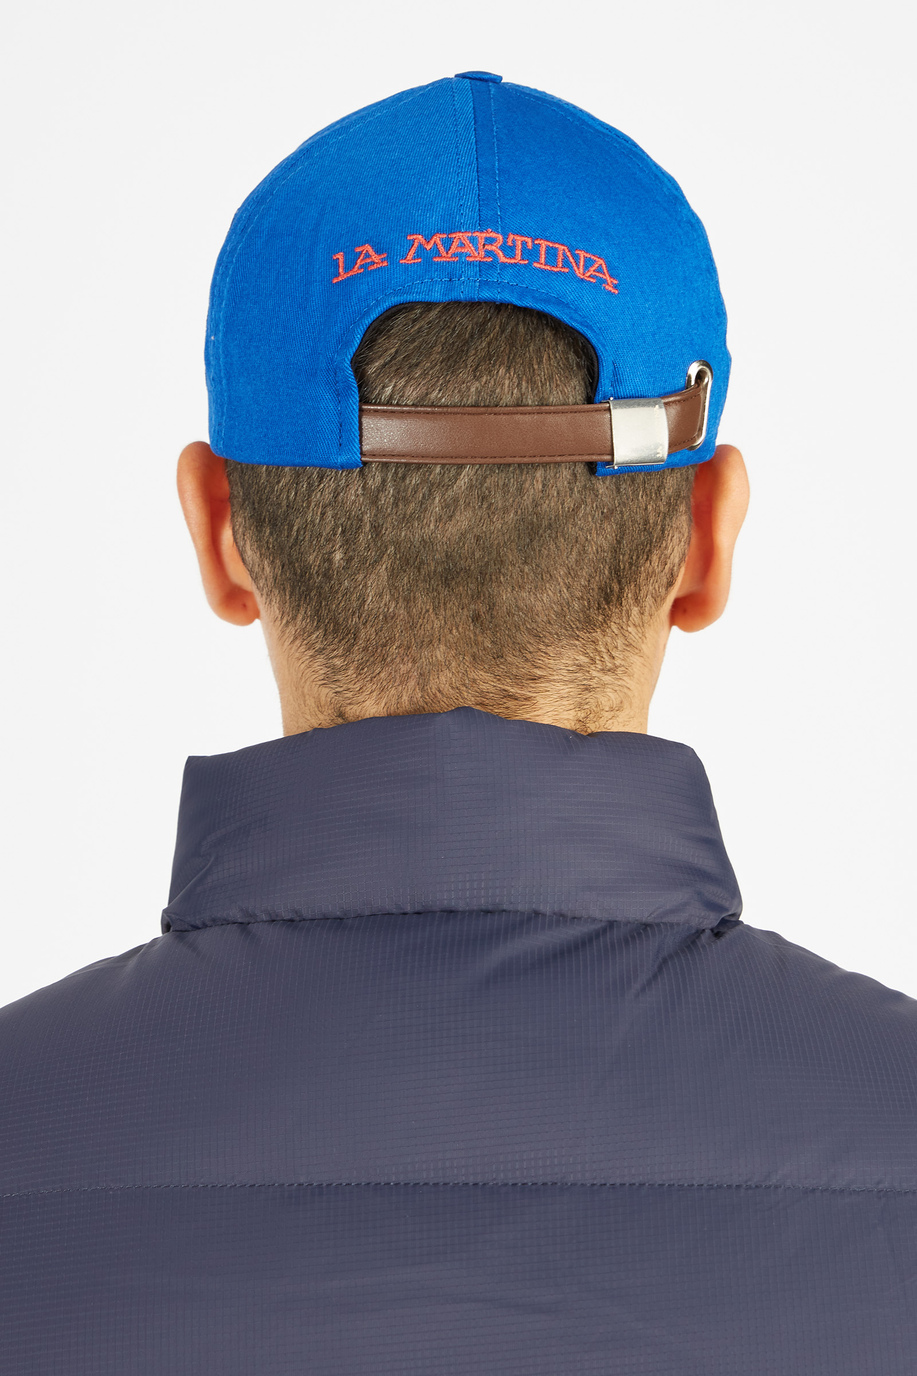 Unisex baseball cap with adjustable regular fit closure - Clubhouse outfits | La Martina - Official Online Shop